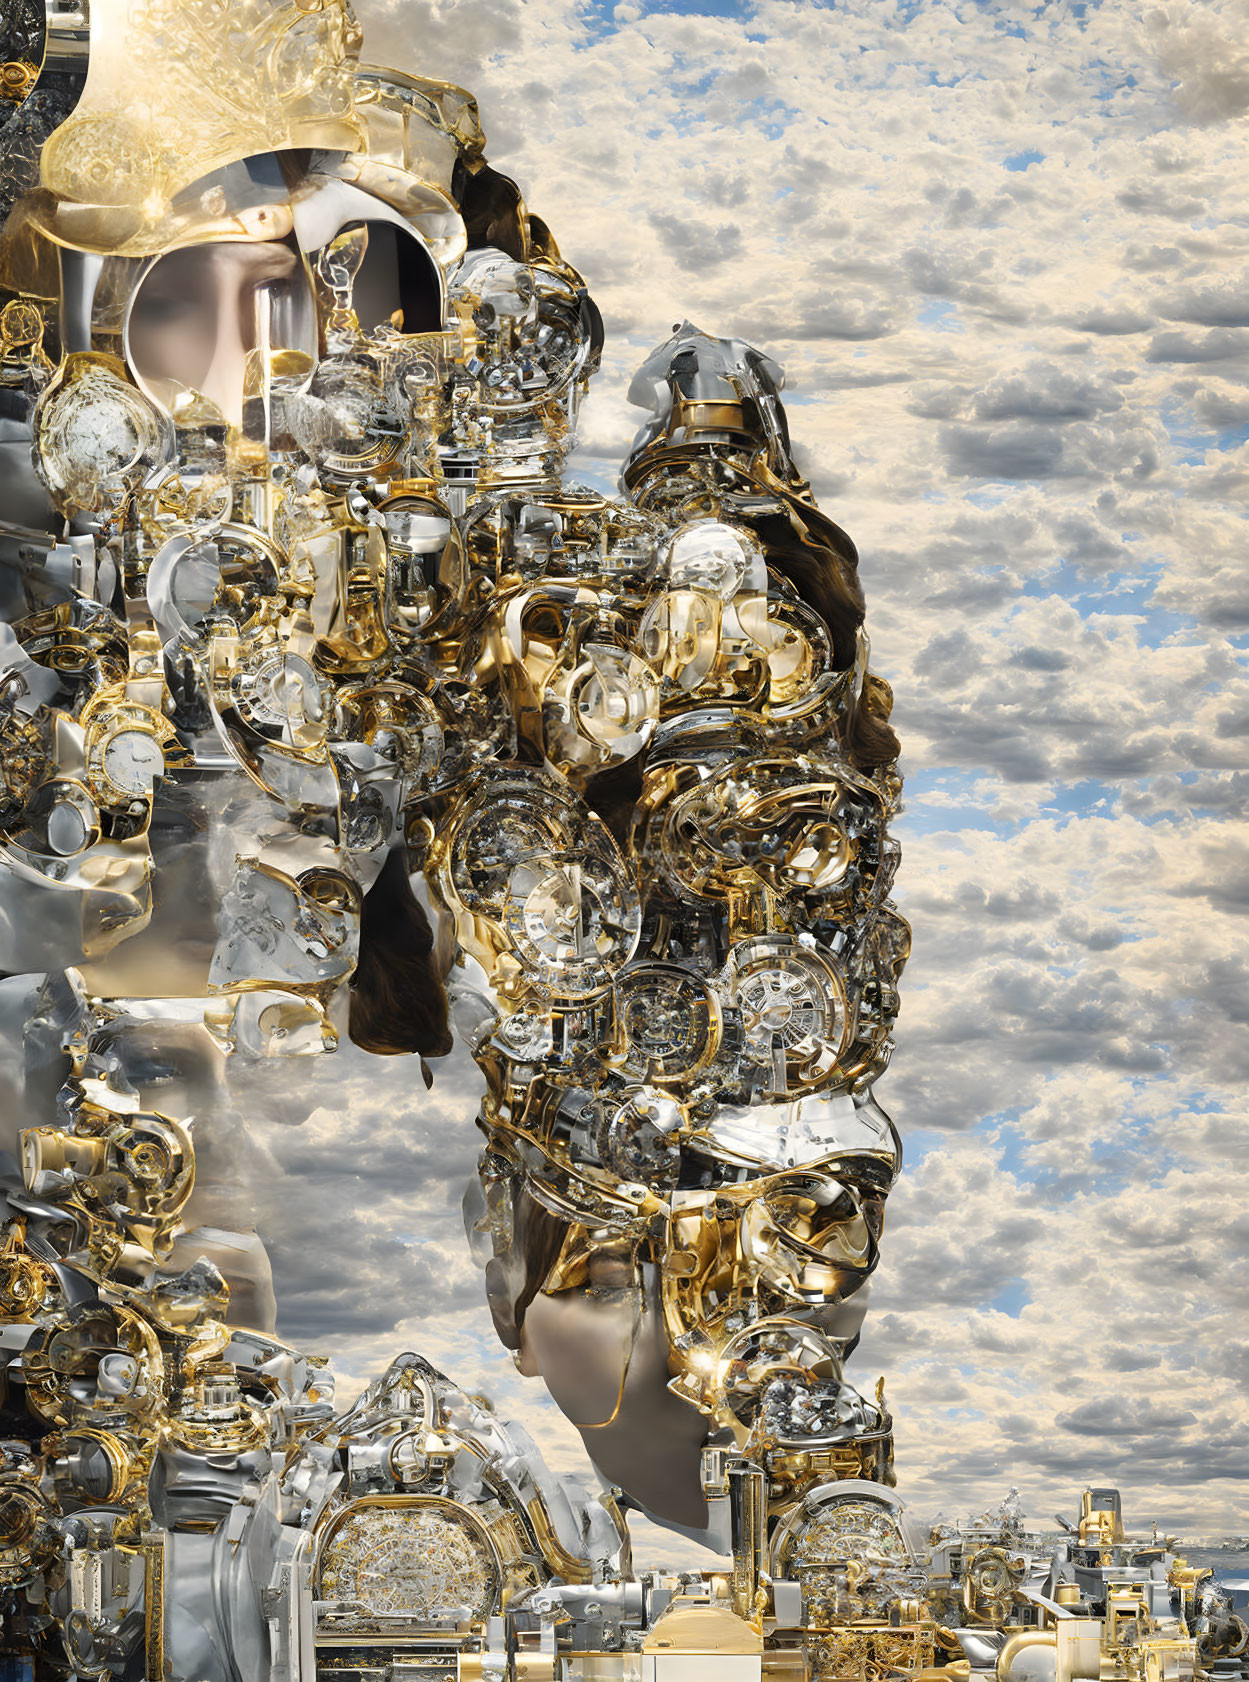 Abstract Metallic Figure Against Cloudy Sky: Surreal Visual Effect